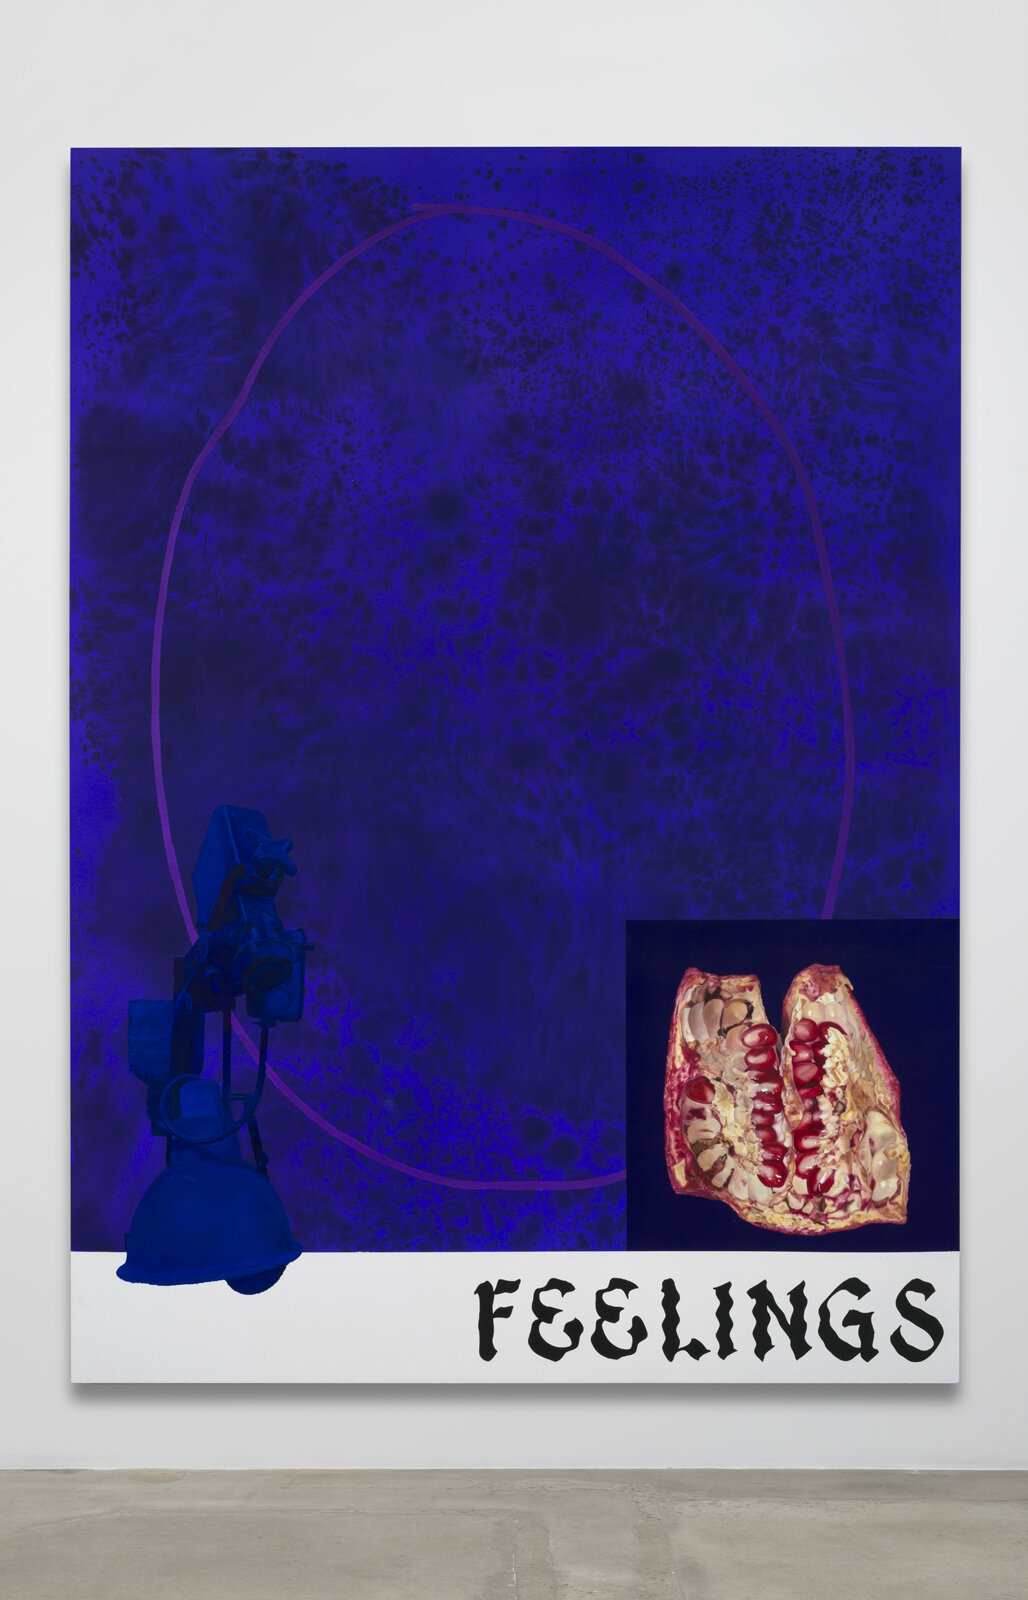   Feelings Painting 5 , 2016. Acrylic on canvas. 84 x 60 inches 